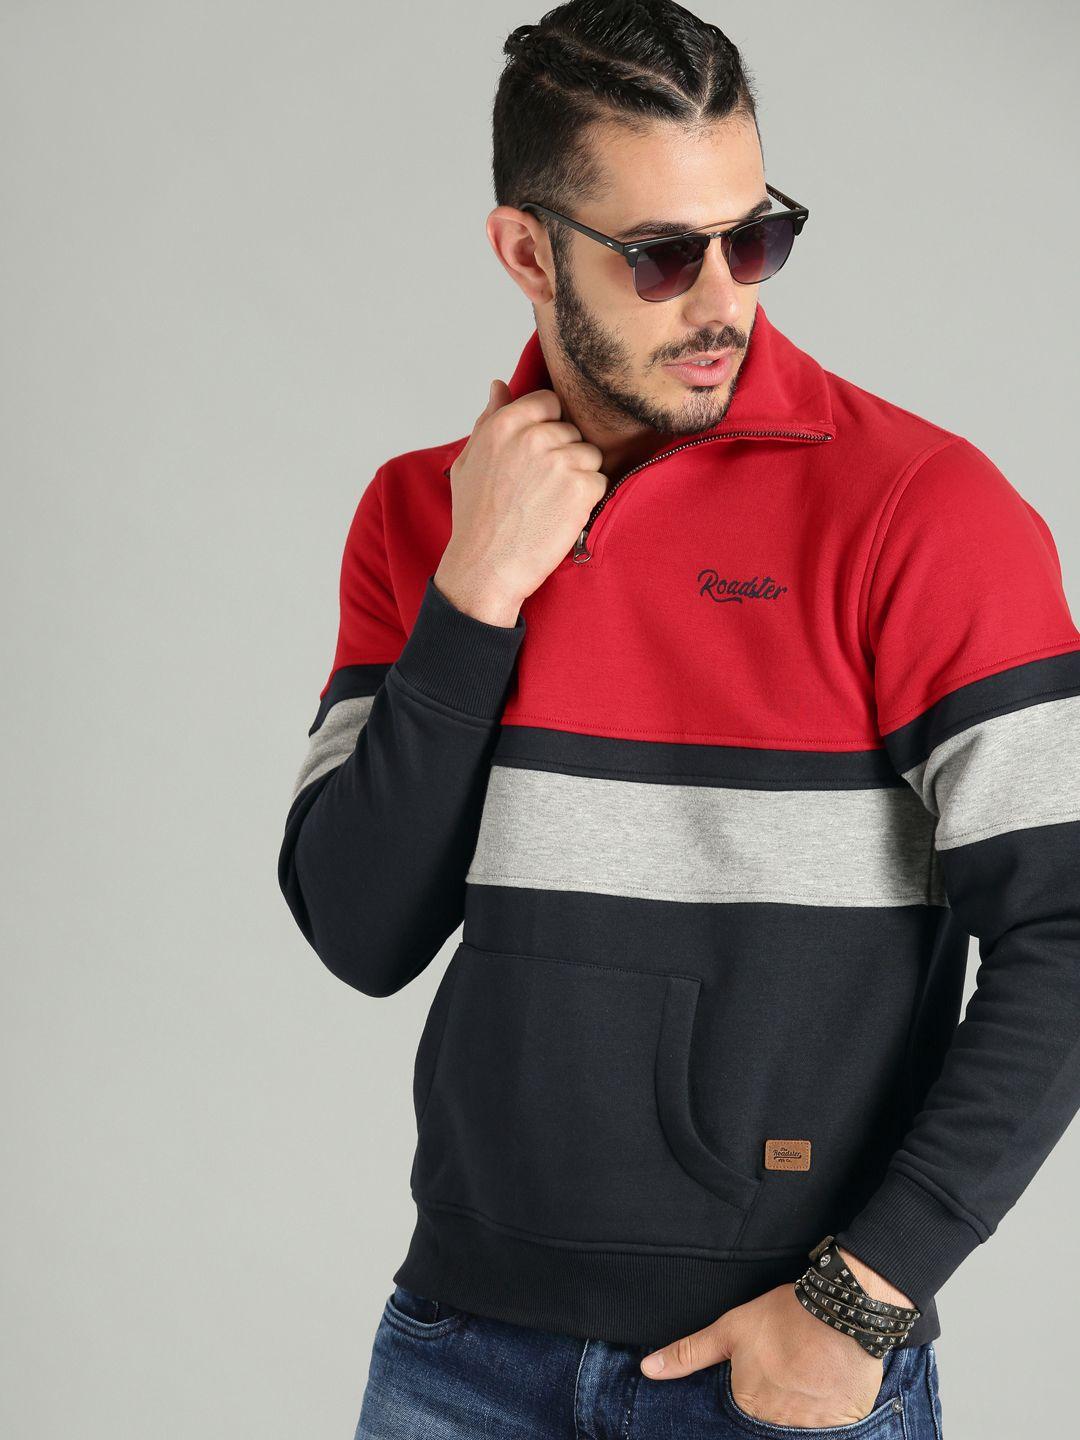 the roadster lifestyle co men navy blue & red colourblocked sweatshirt